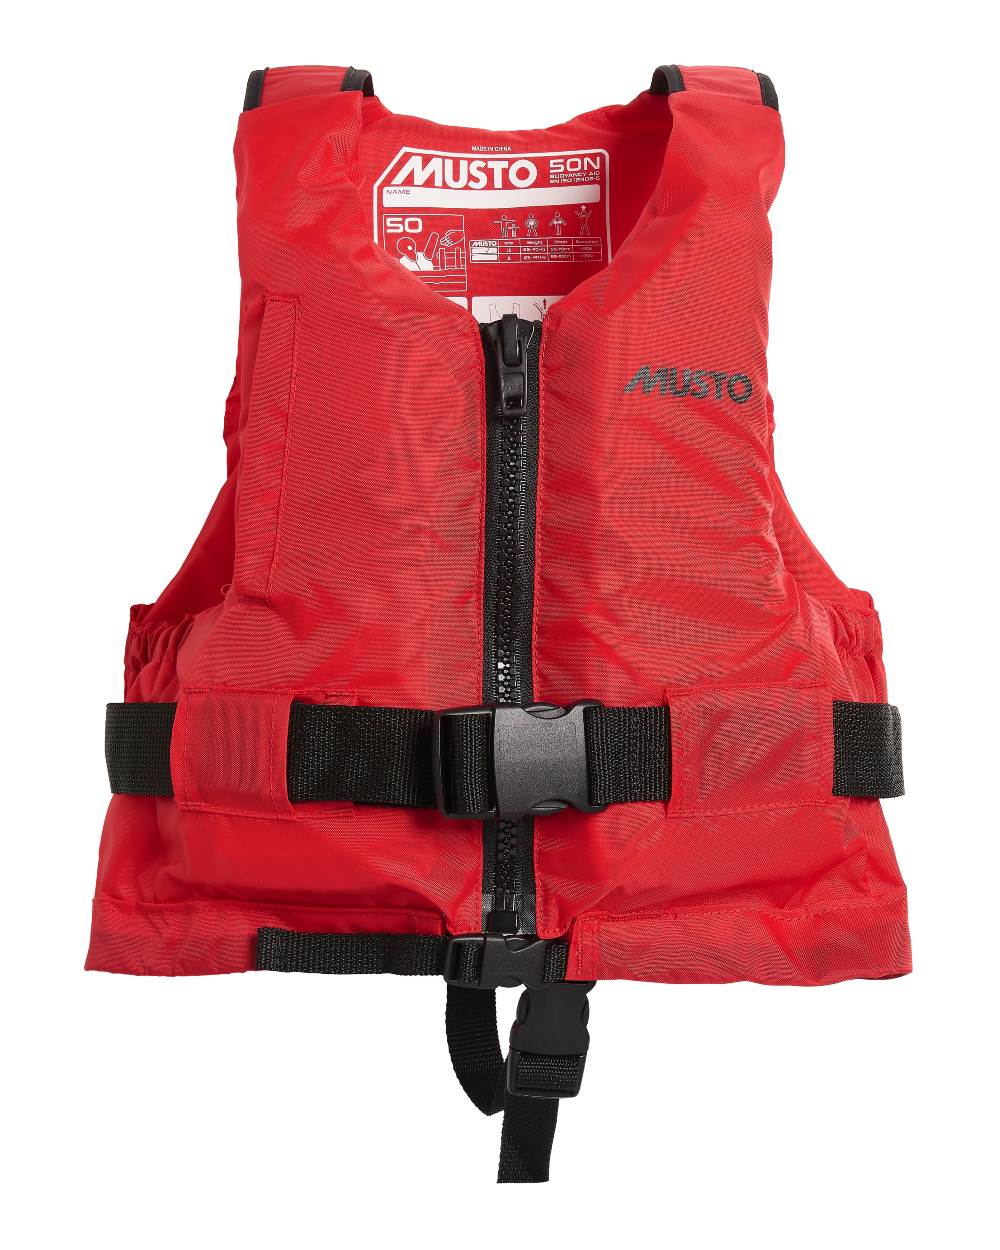 True Red Coloured Musto Junior Buoyancy Aid On A White Background 